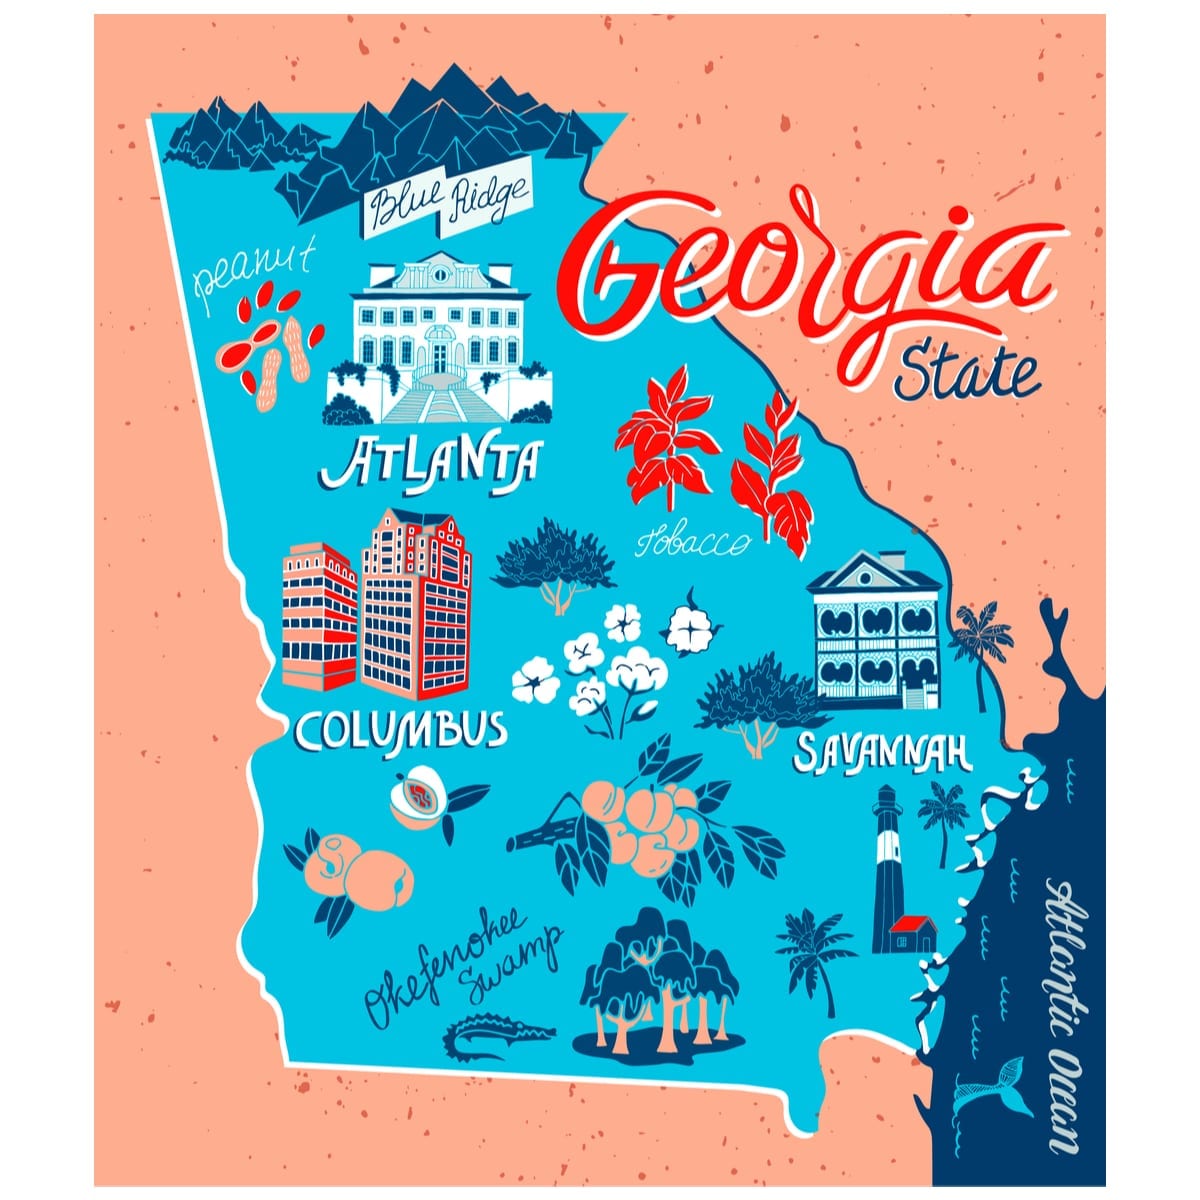 Illustrated map of Georgia, USA. Travel and attractions